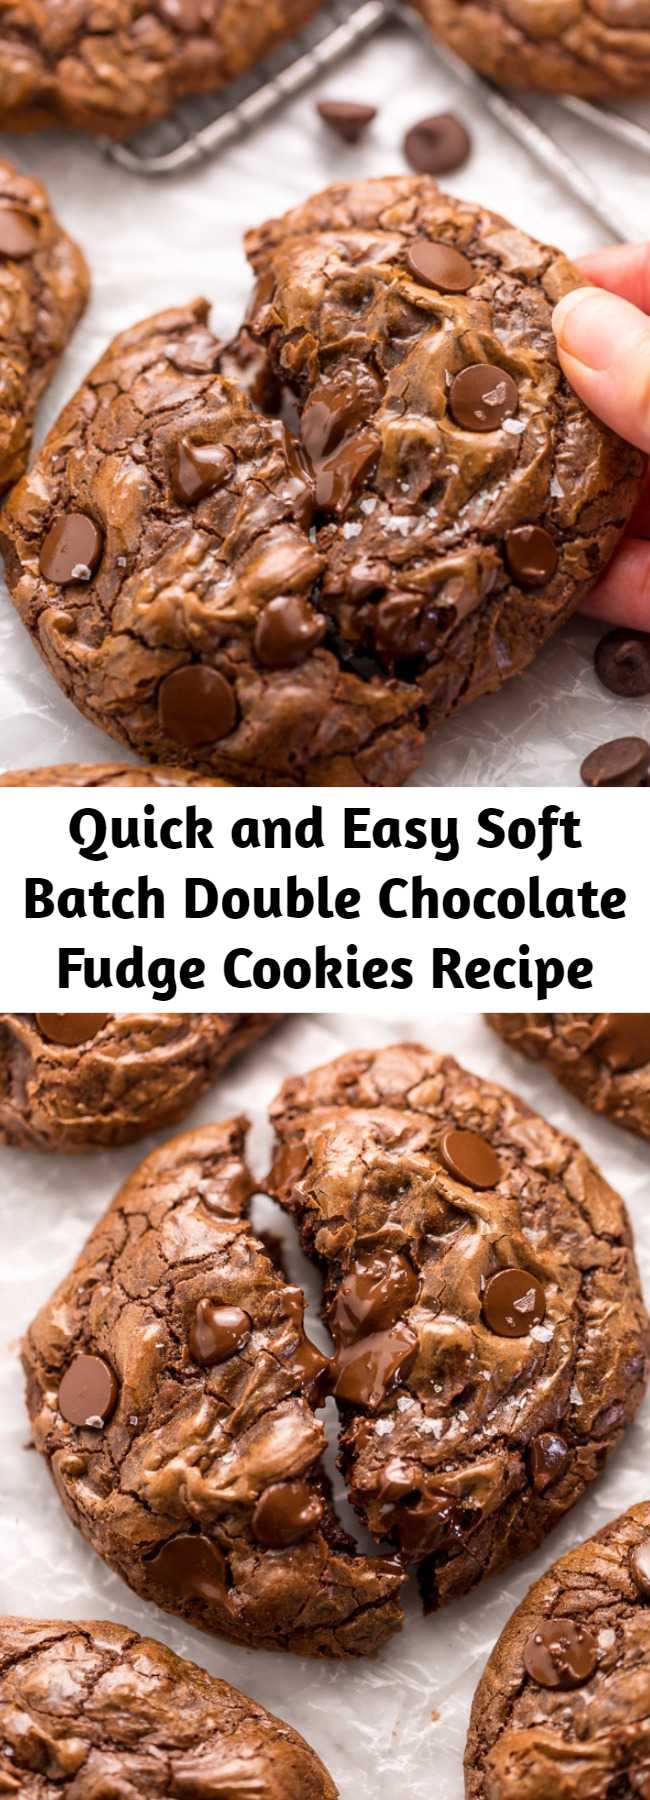 Quick and Easy Soft Batch Double Chocolate Fudge Cookies Recipe - These Soft Batch Double Chocolate Fudge Cookies are for CHOCOLATE LOVERS only!!! Full of intense chocolate fudge flavor, these cookies basically melt in your mouth. So good with a glass of milk!